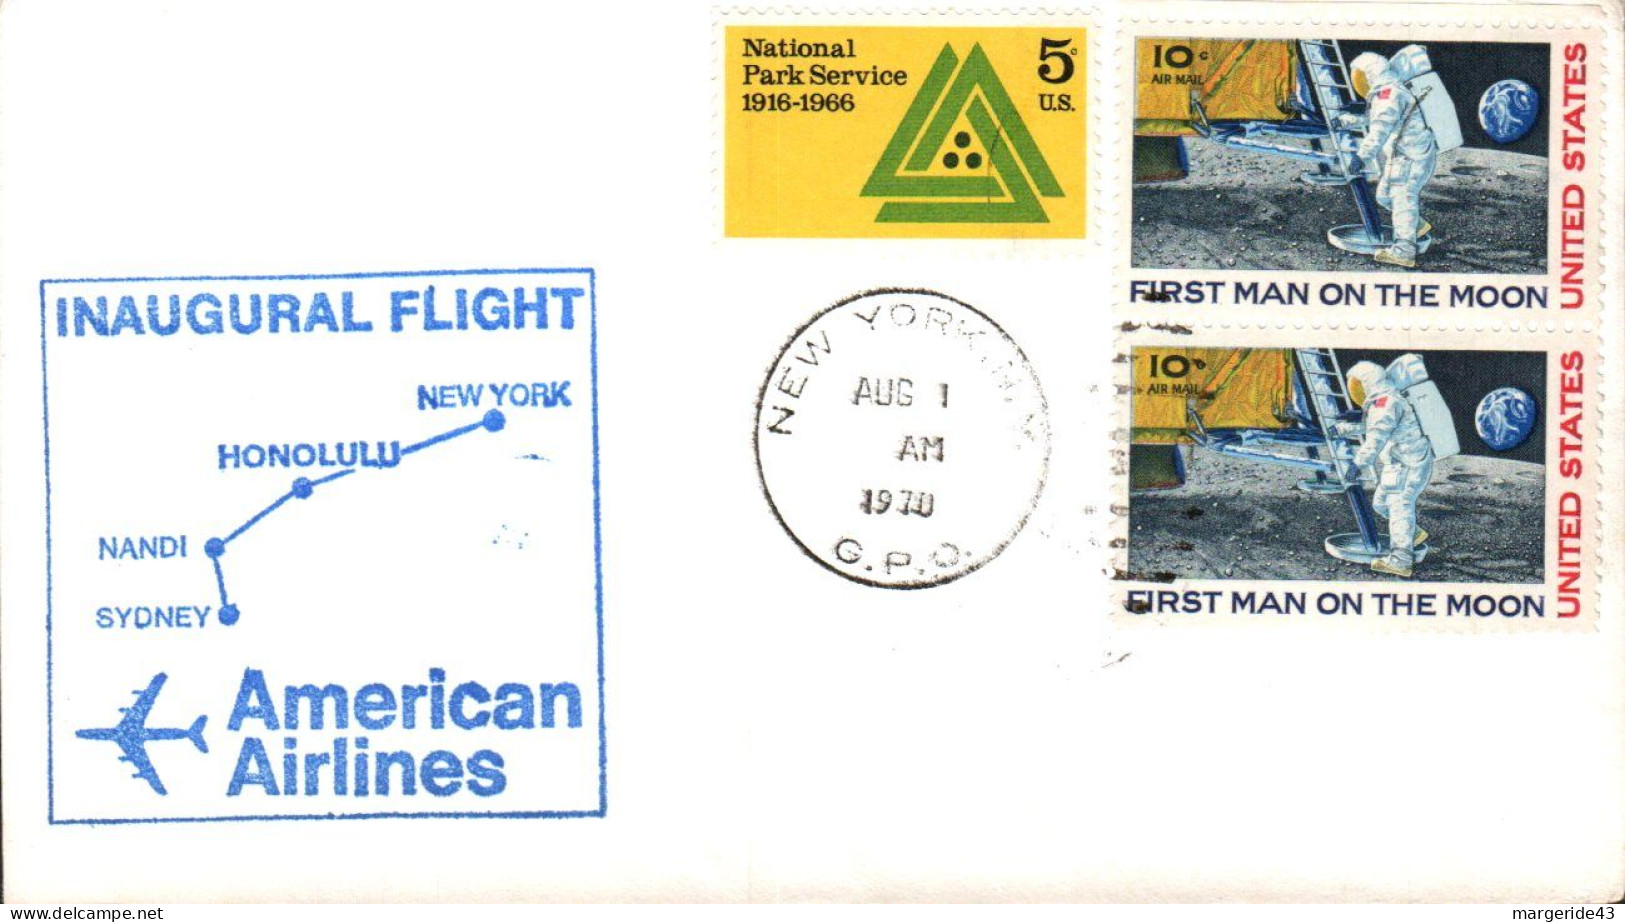 USA ETATS UNIS 1ER VOL 747 AMERICAN AIRLINES LOS ANGELES-FIJI N1970 - Event Covers